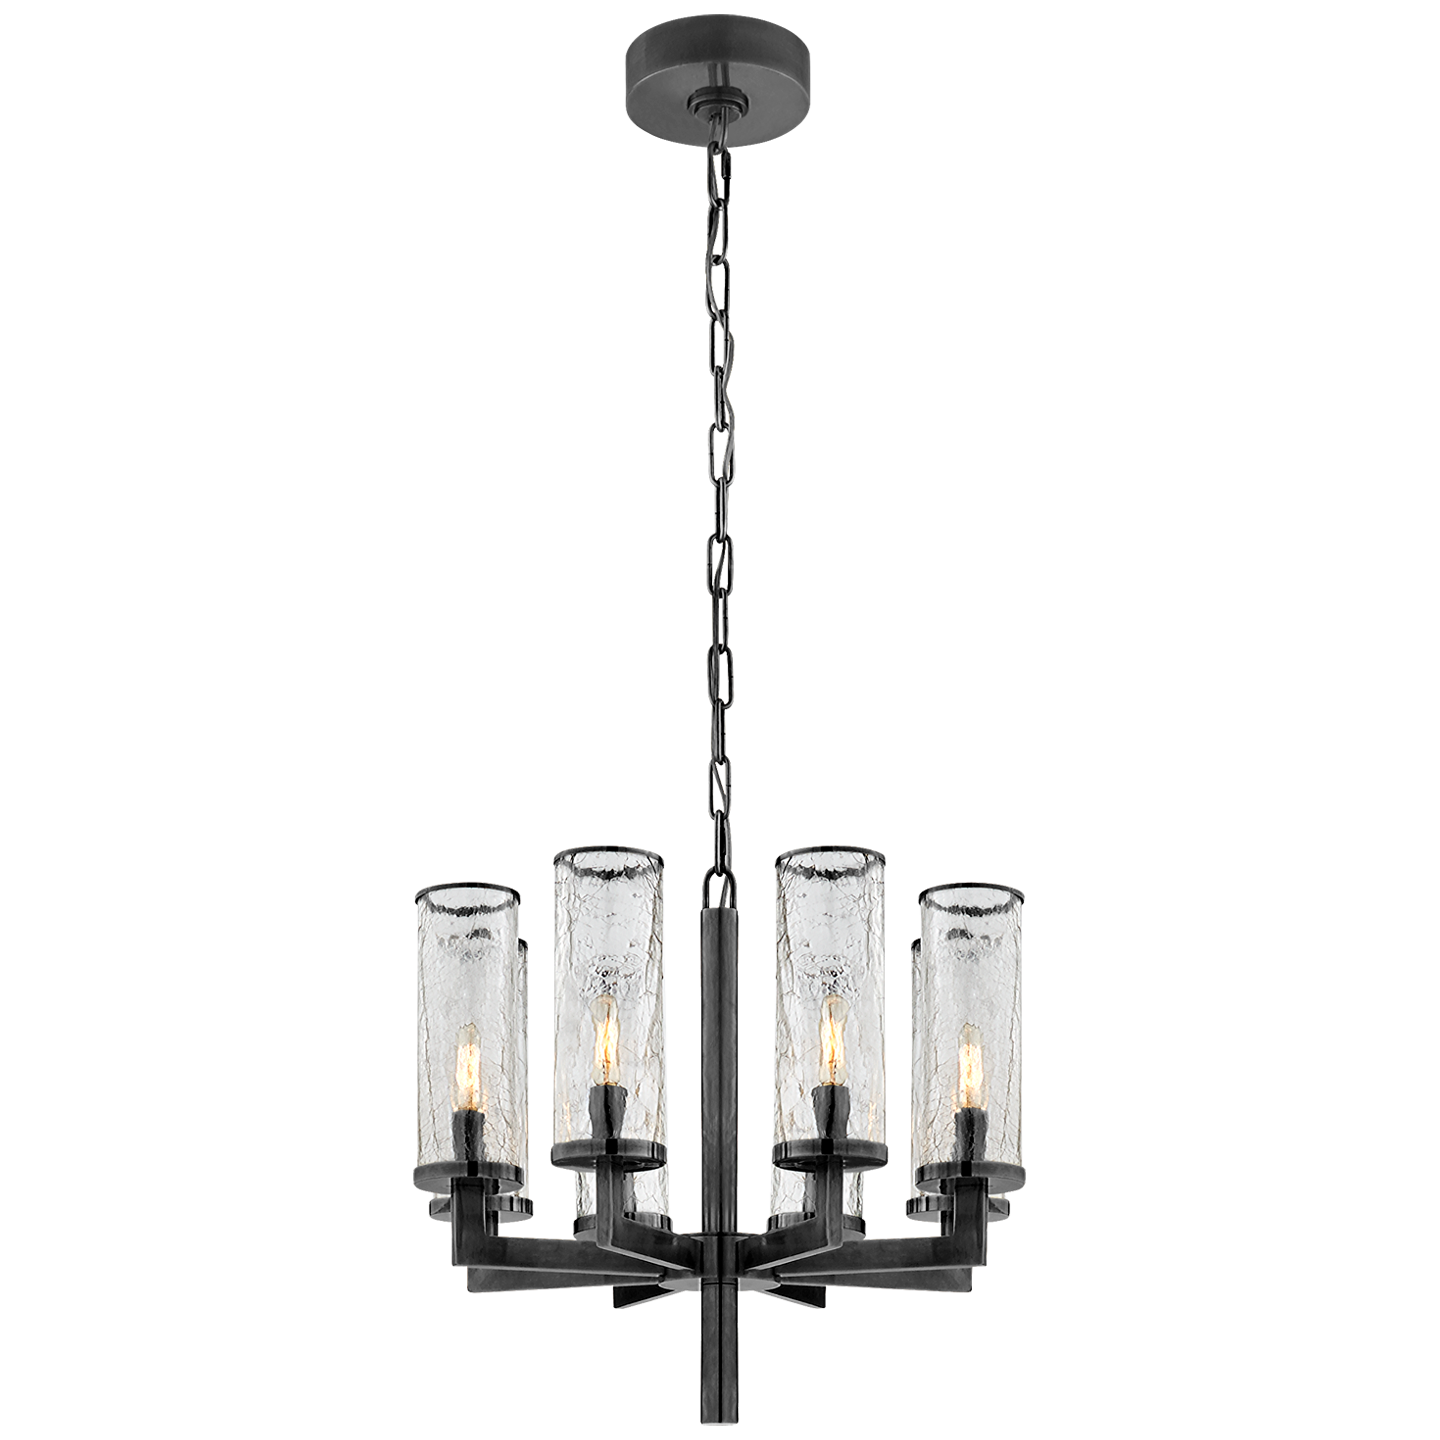 Buy Liaison Double Tier Chandelier By Visual Comfort